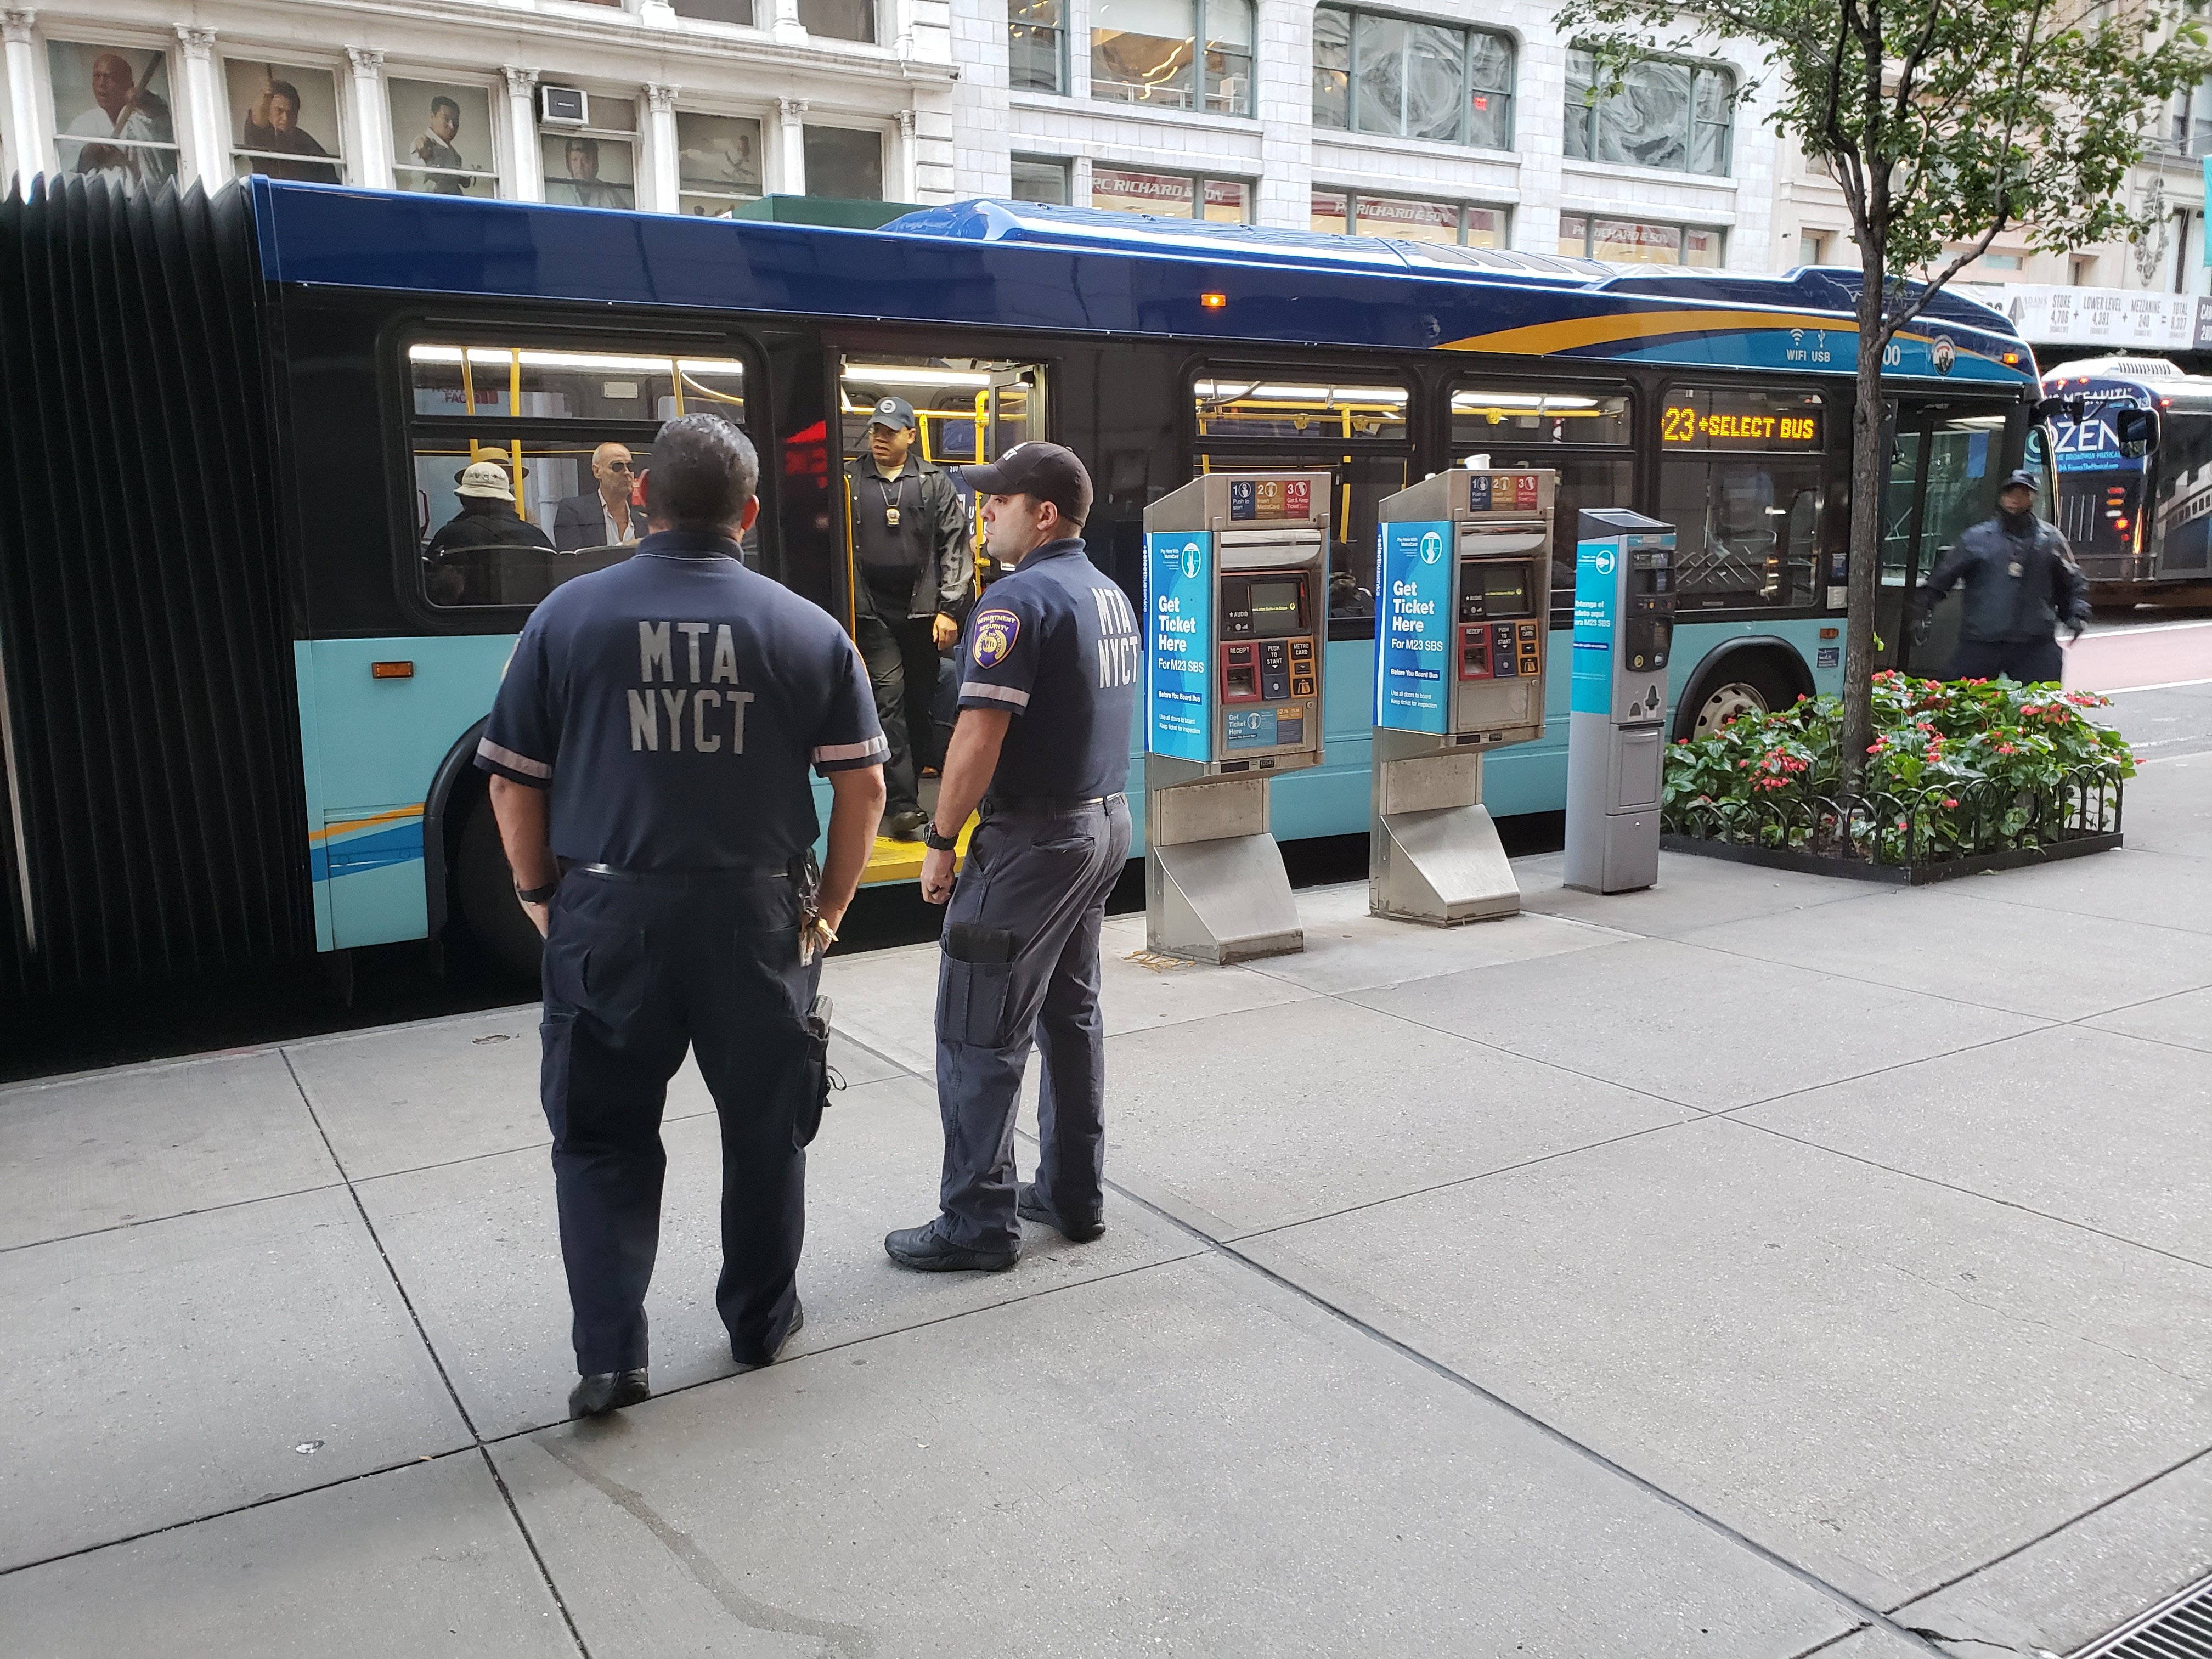 Image for: Fair Fare Enforcement? Collecting fares and all door bus boarding in NYC